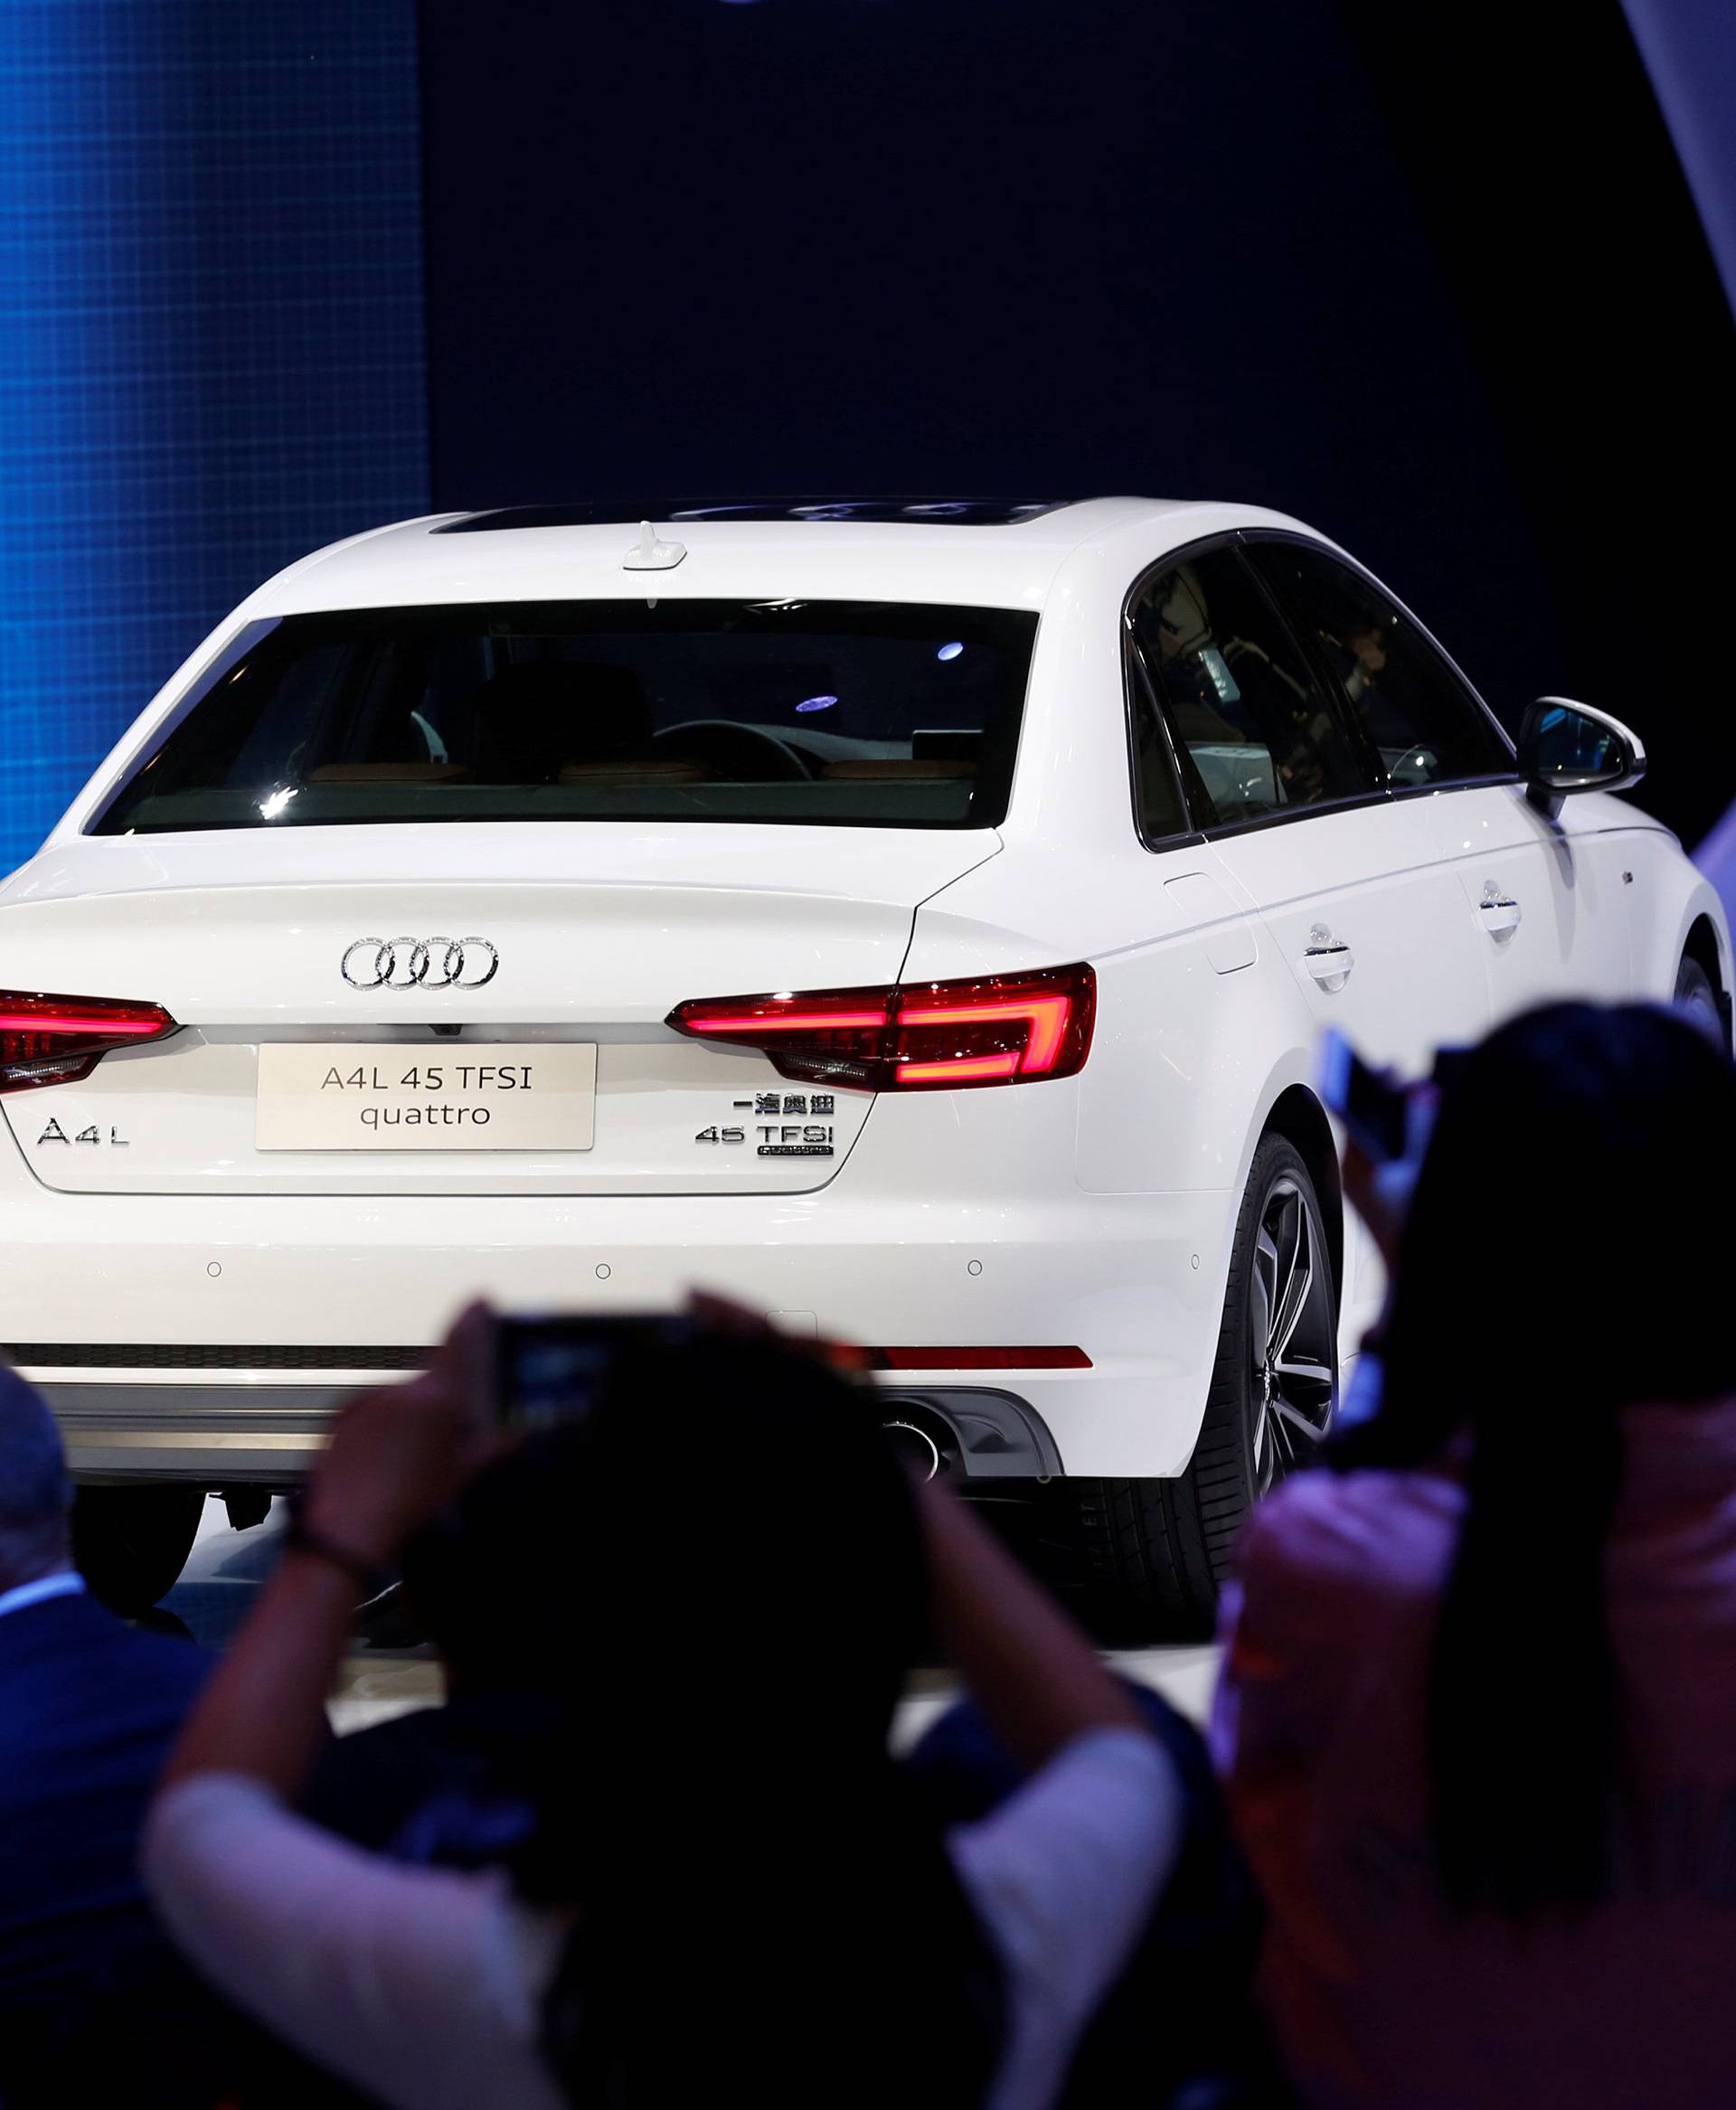 Visitors take picture of Audi A4L 45 TFSI quattro at its launching ceremony during the Auto China 2016 auto show in Beijing